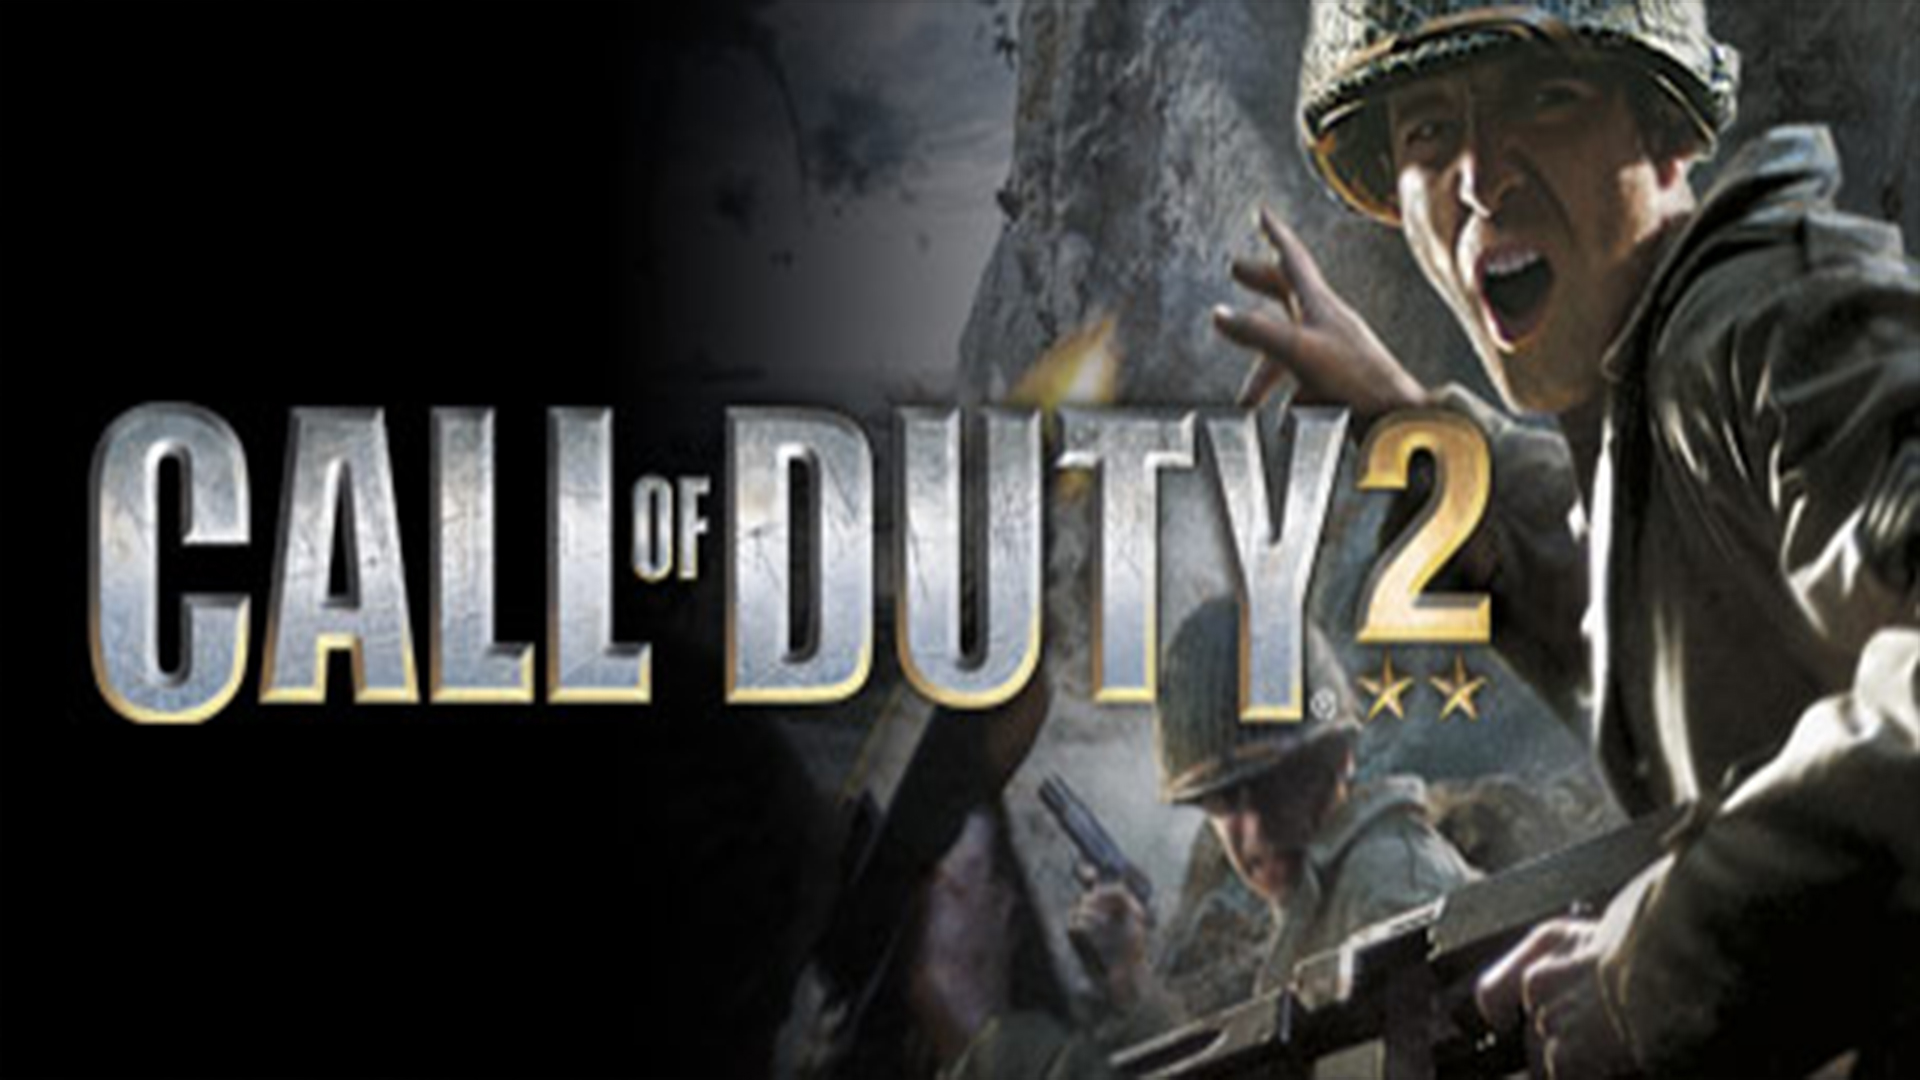 call of duty 2 for mac torrent